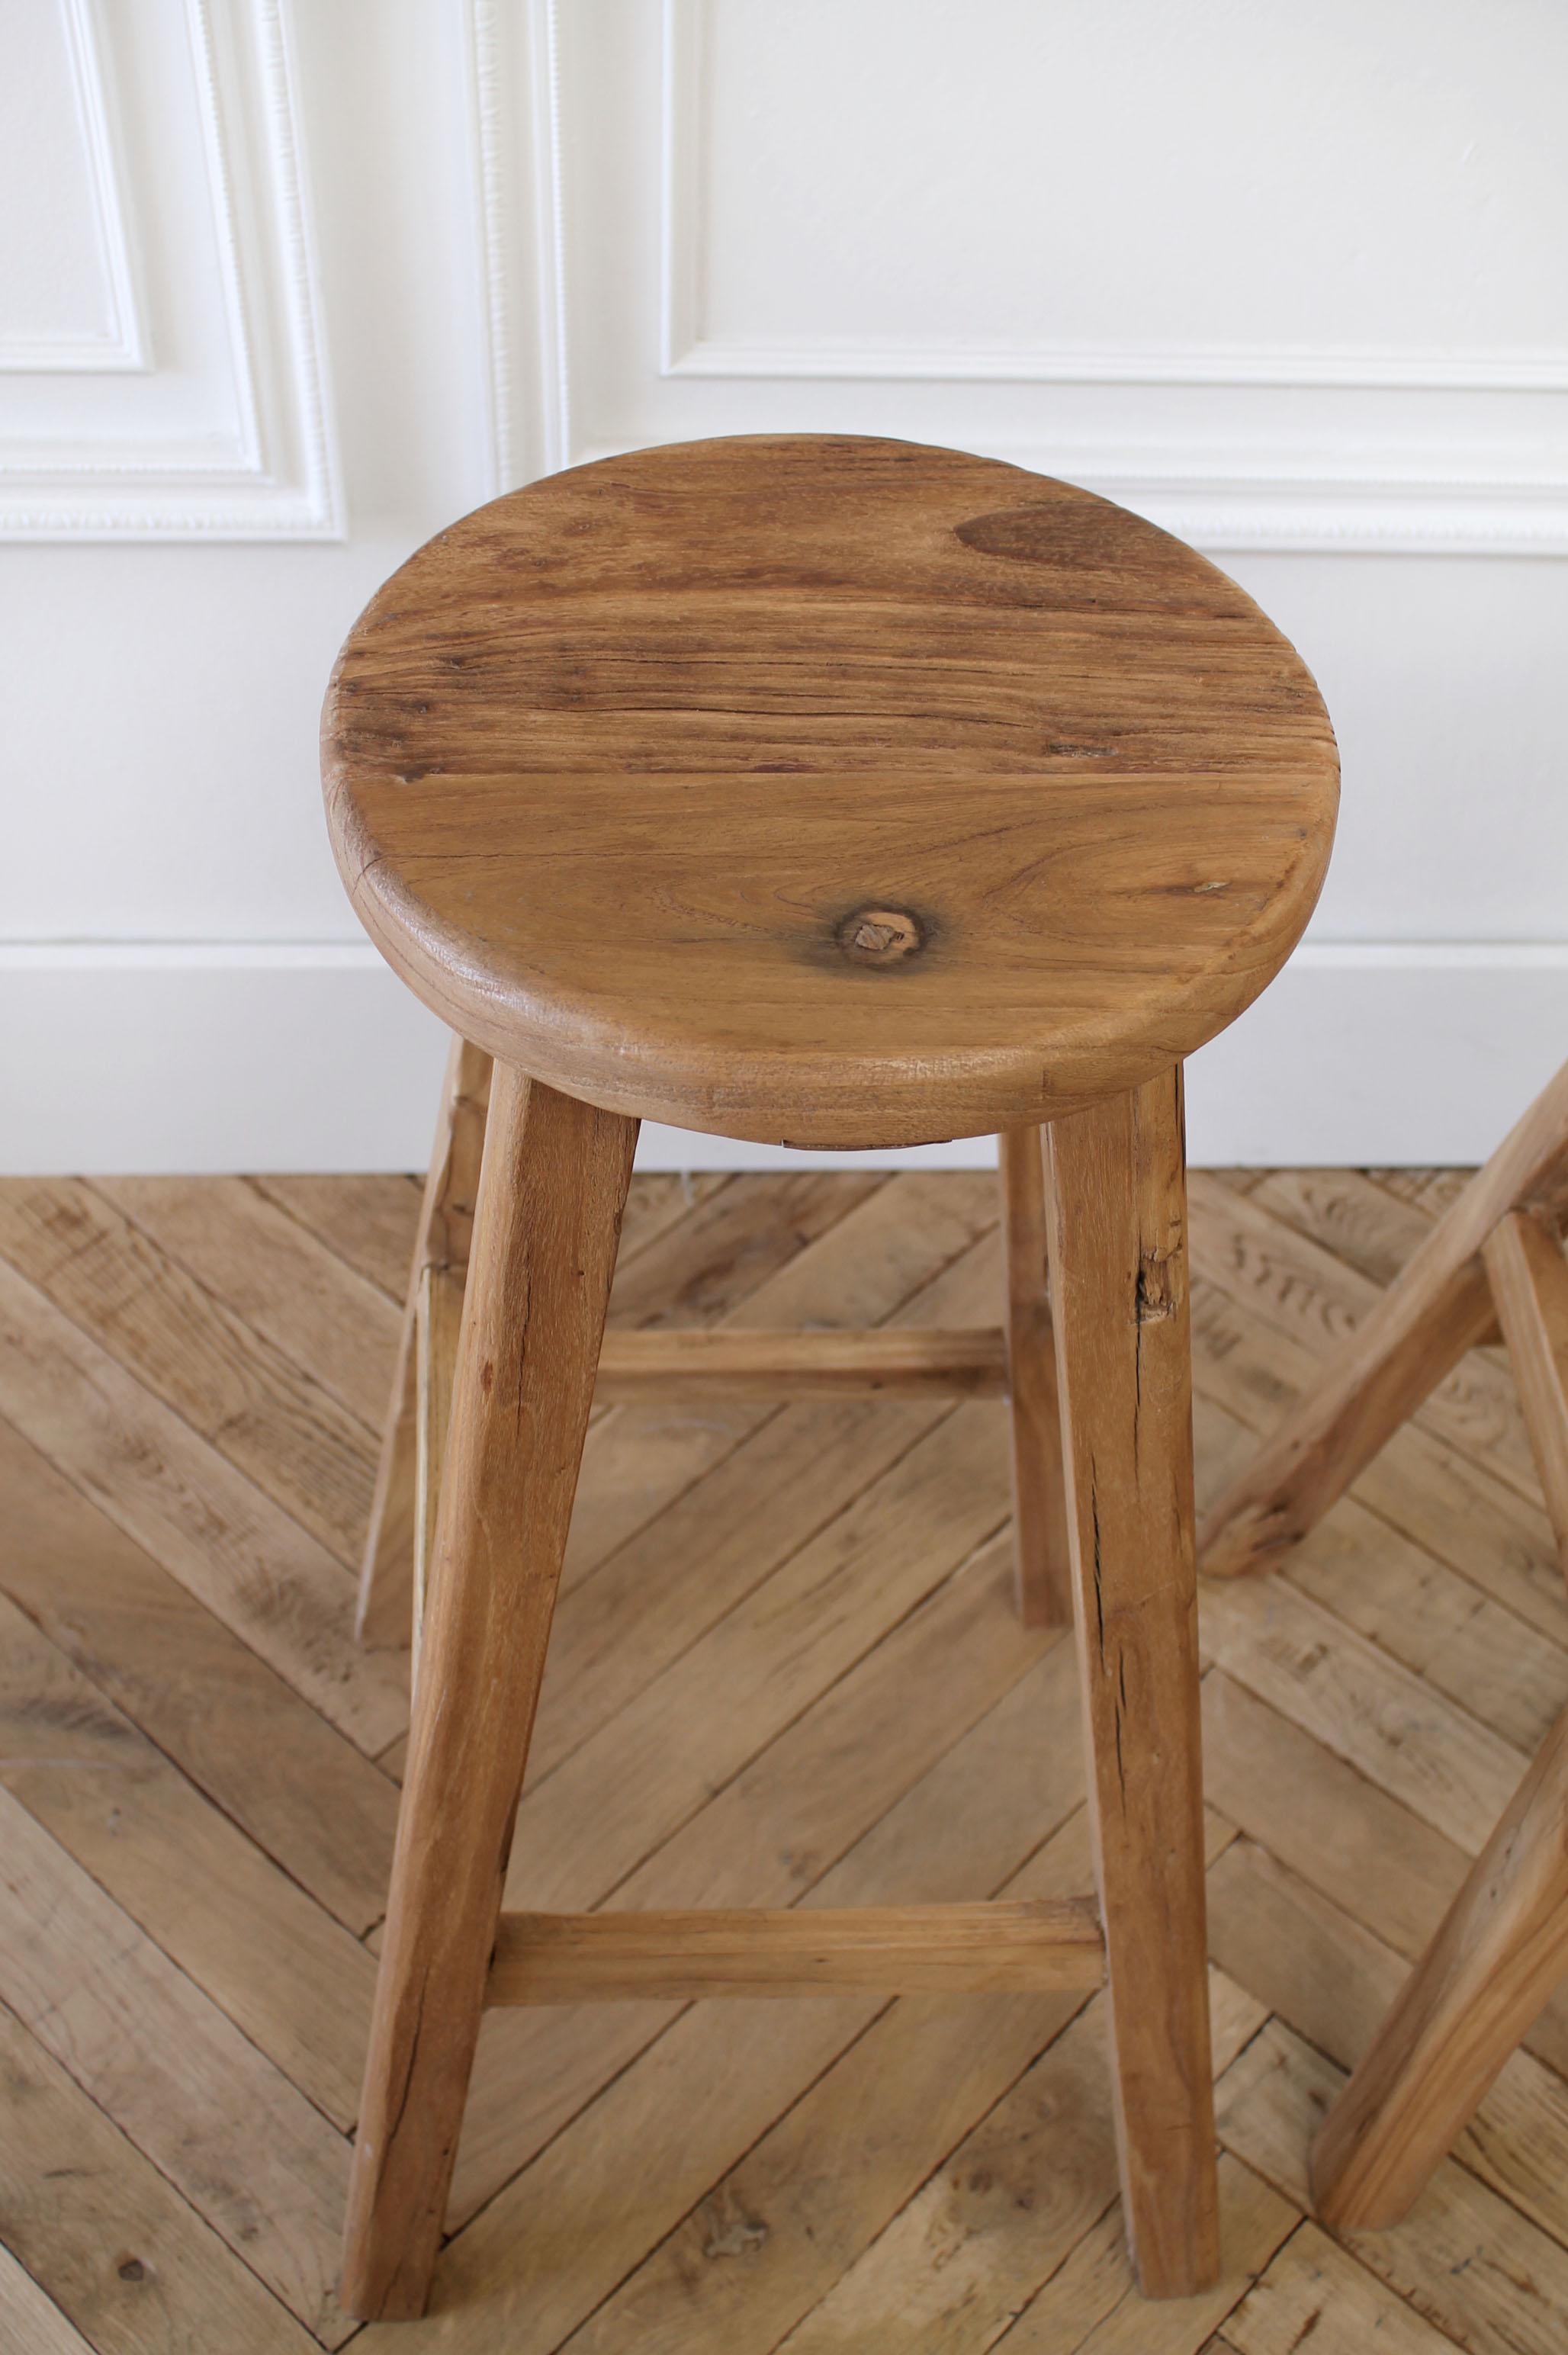 Set of 4 reclaimed elmwood bar stools
Round seats with a flat top, very solid and sturdy. Can be cut down to accommodate counter height stools.
Measures: 16